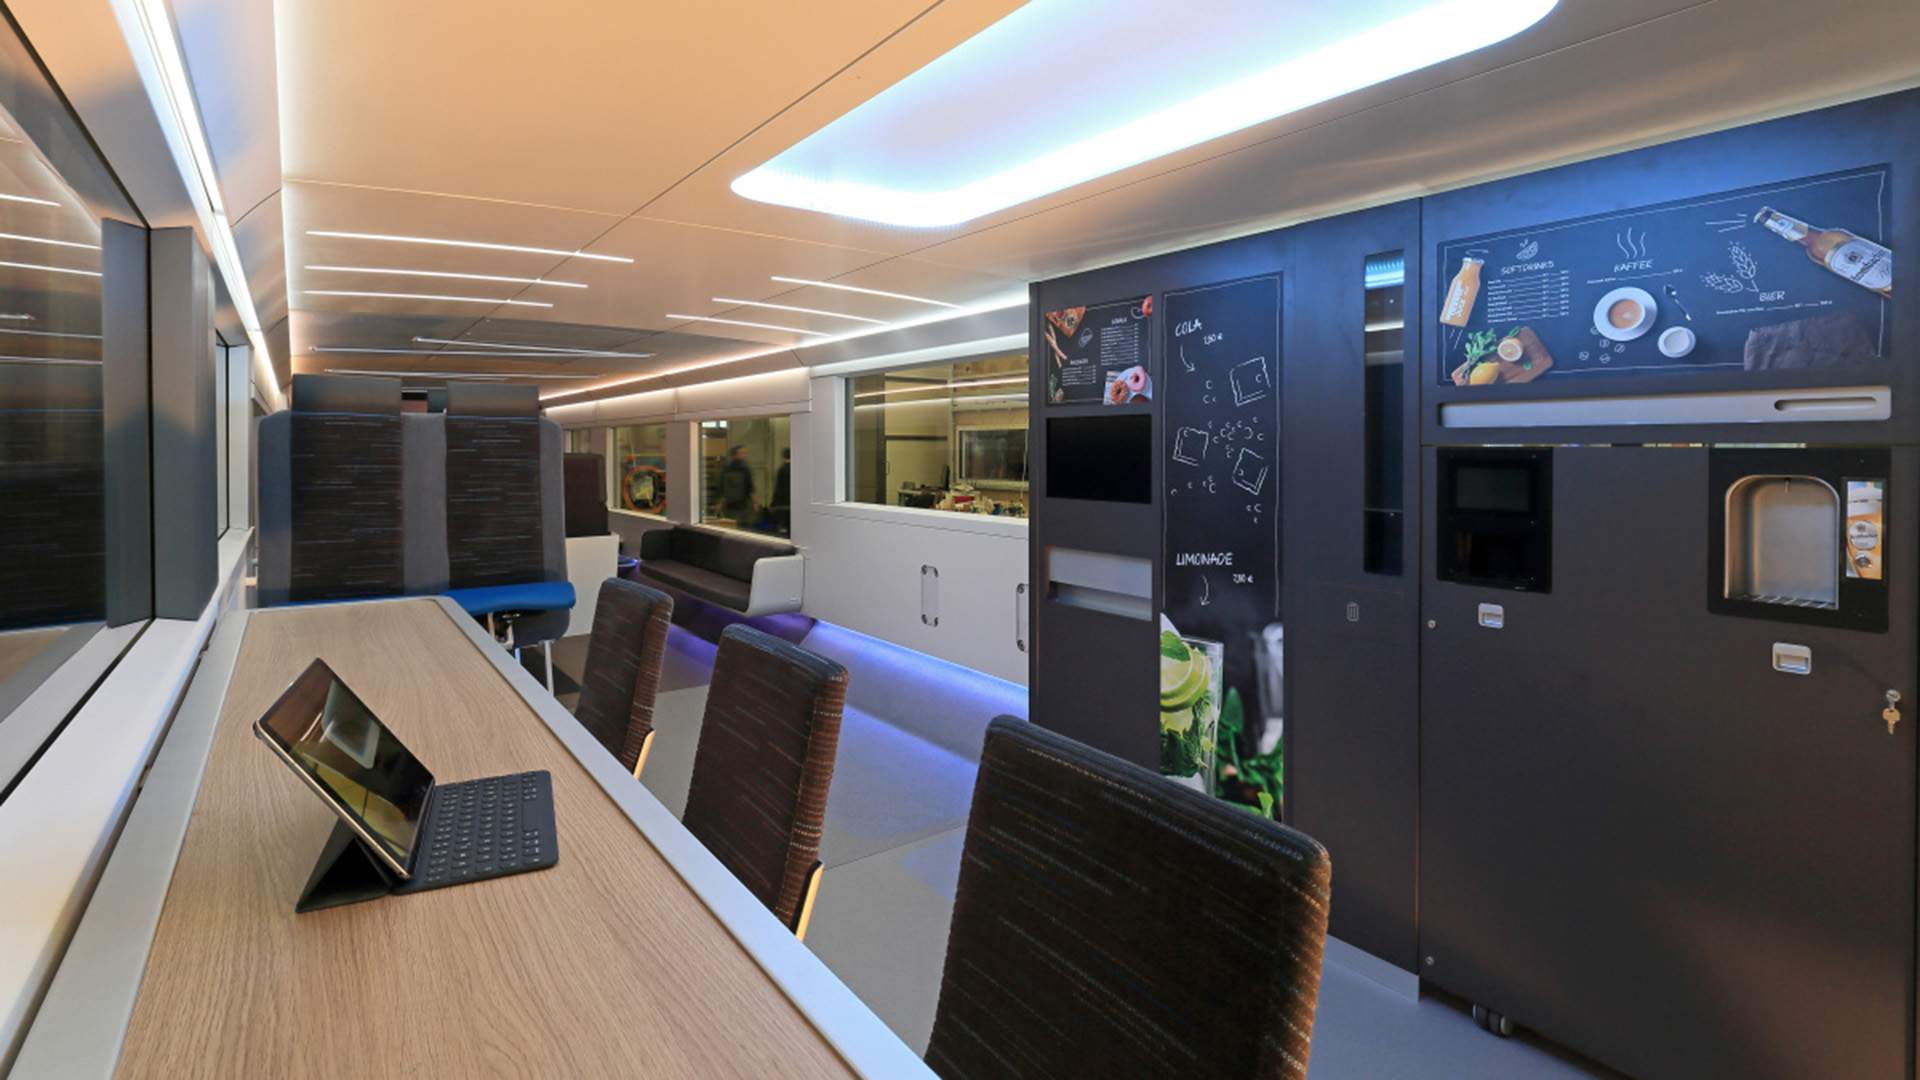 Germany's 'Train of the Future' Features a Gym, Gaming Consoles and Beer on Tap